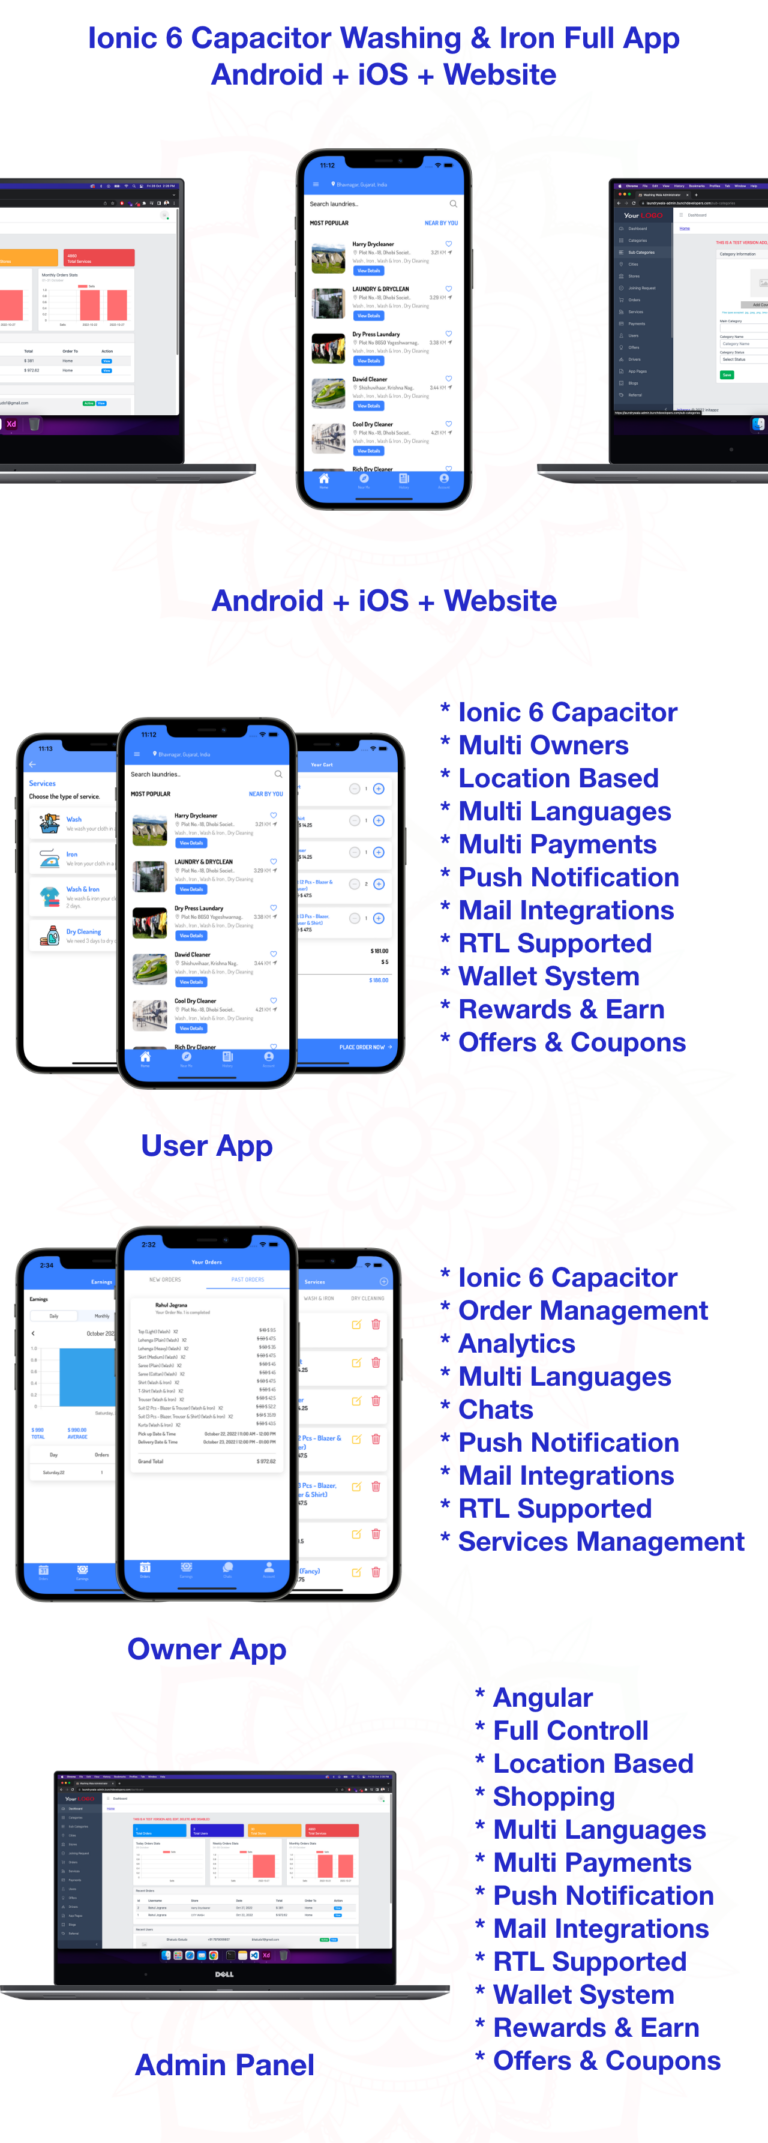 clothes washing and laundry multi-vendor full app solution android + ios (Laundry Wala) Ionic 7 - 2